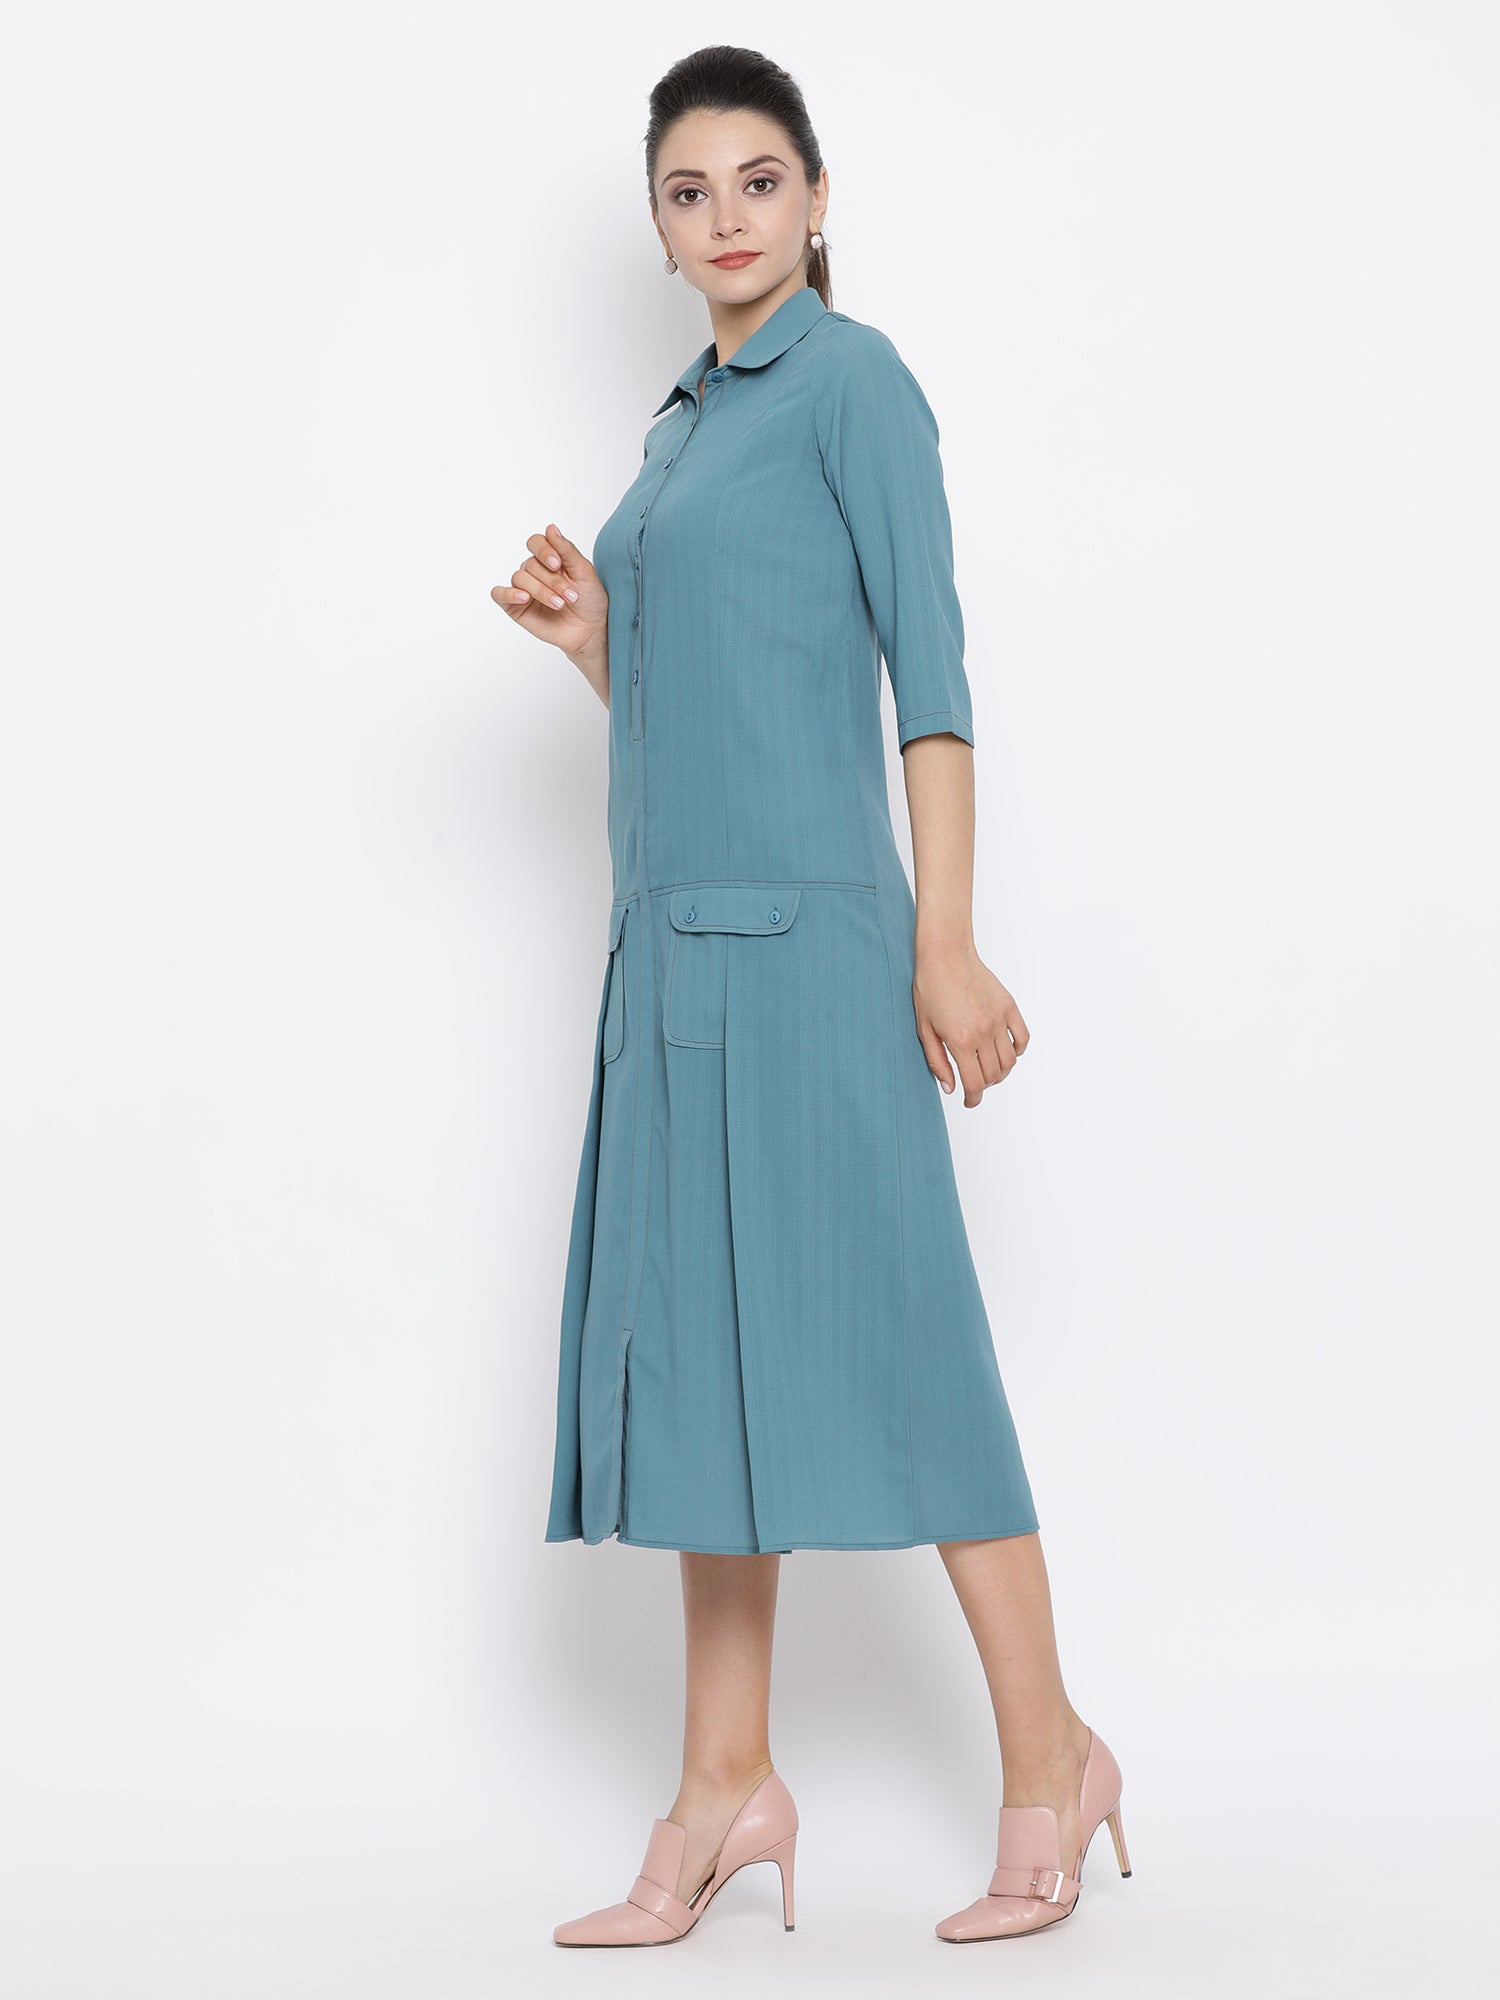 Teal Dress With Flap Pocket